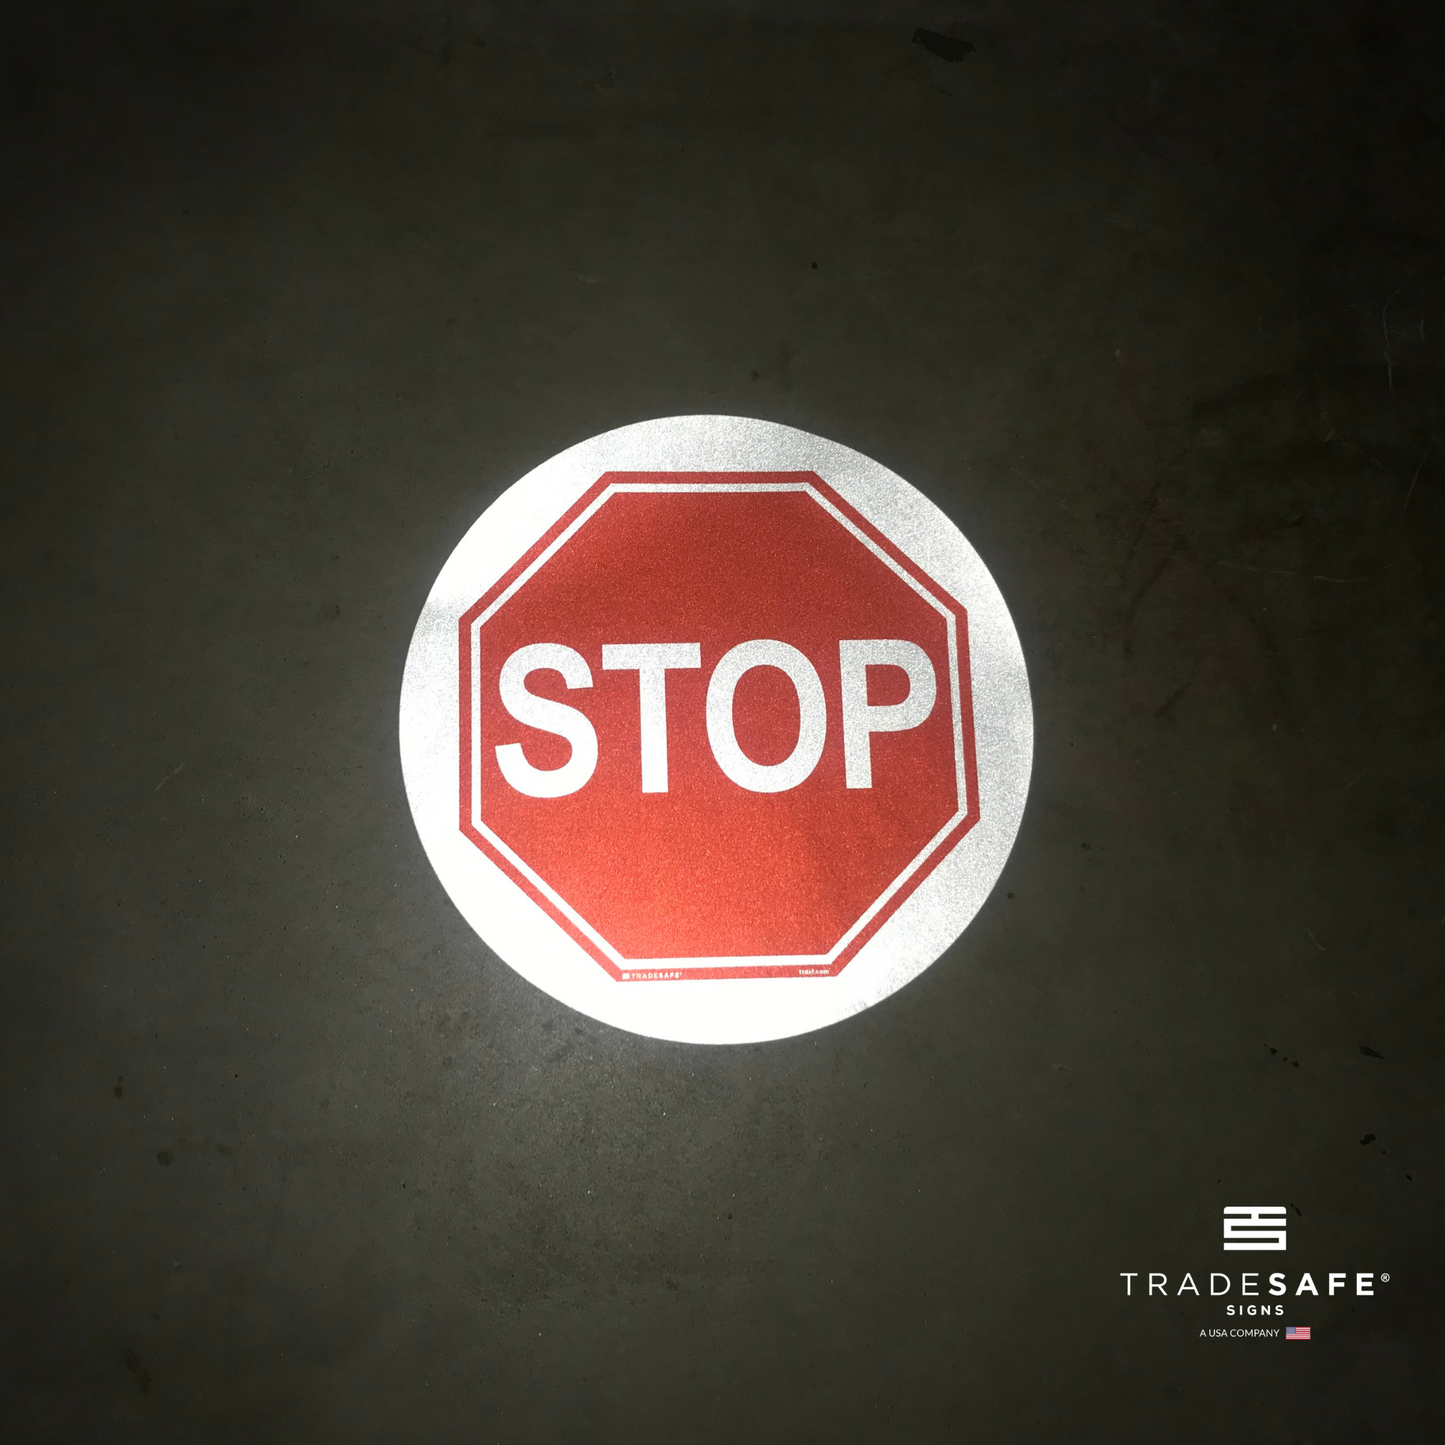 reflective attribute of stop sign on black background